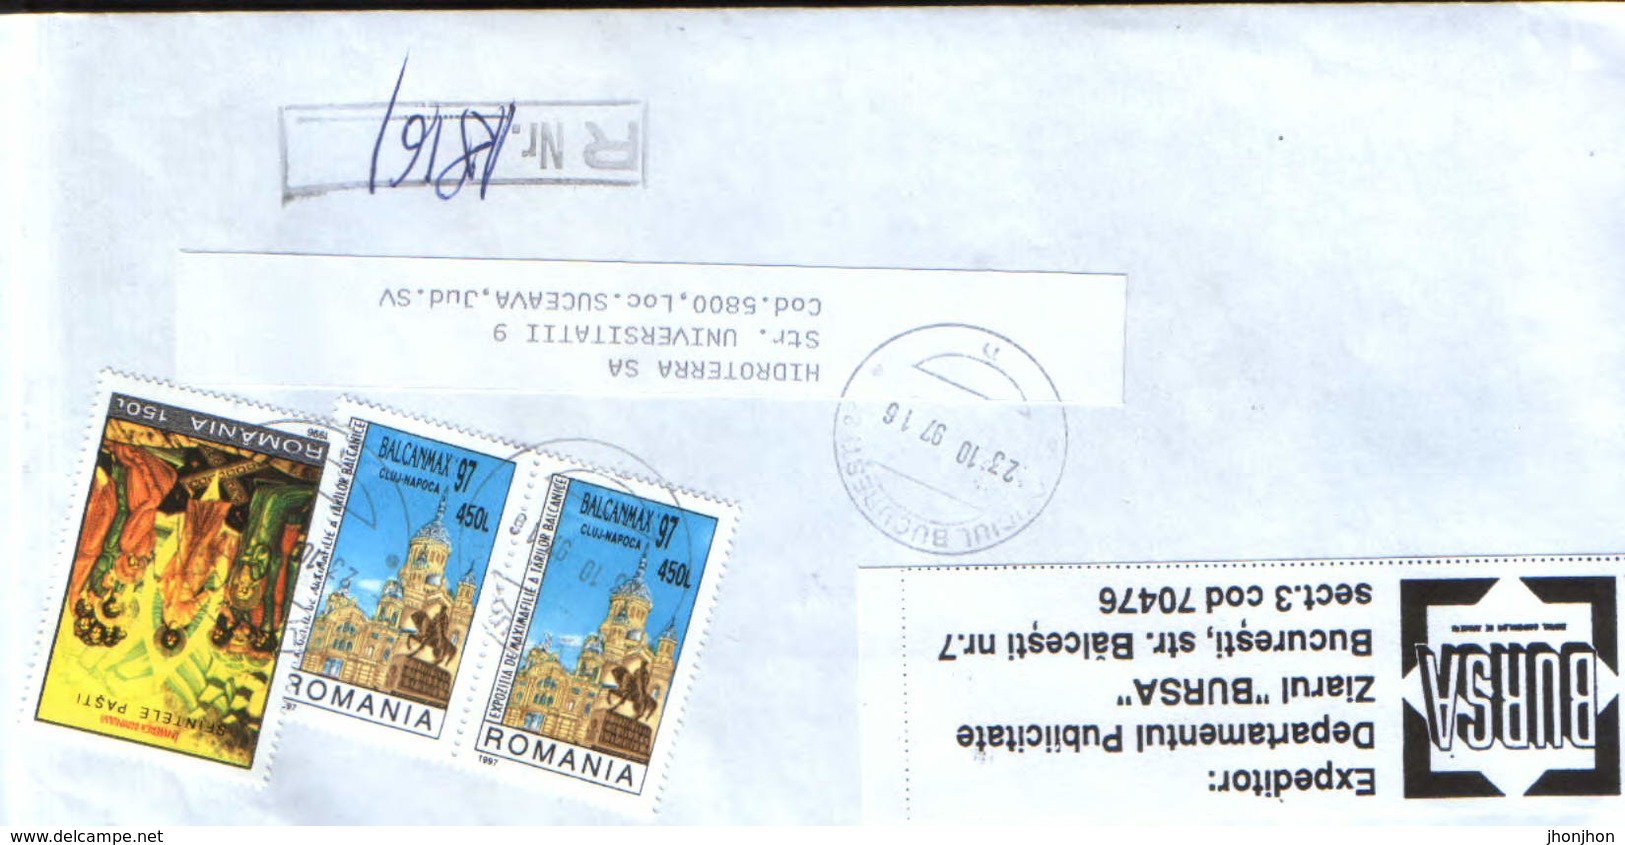 Romania - Registered  Letter Circulated In 1997  - 2/scans - Briefe U. Dokumente